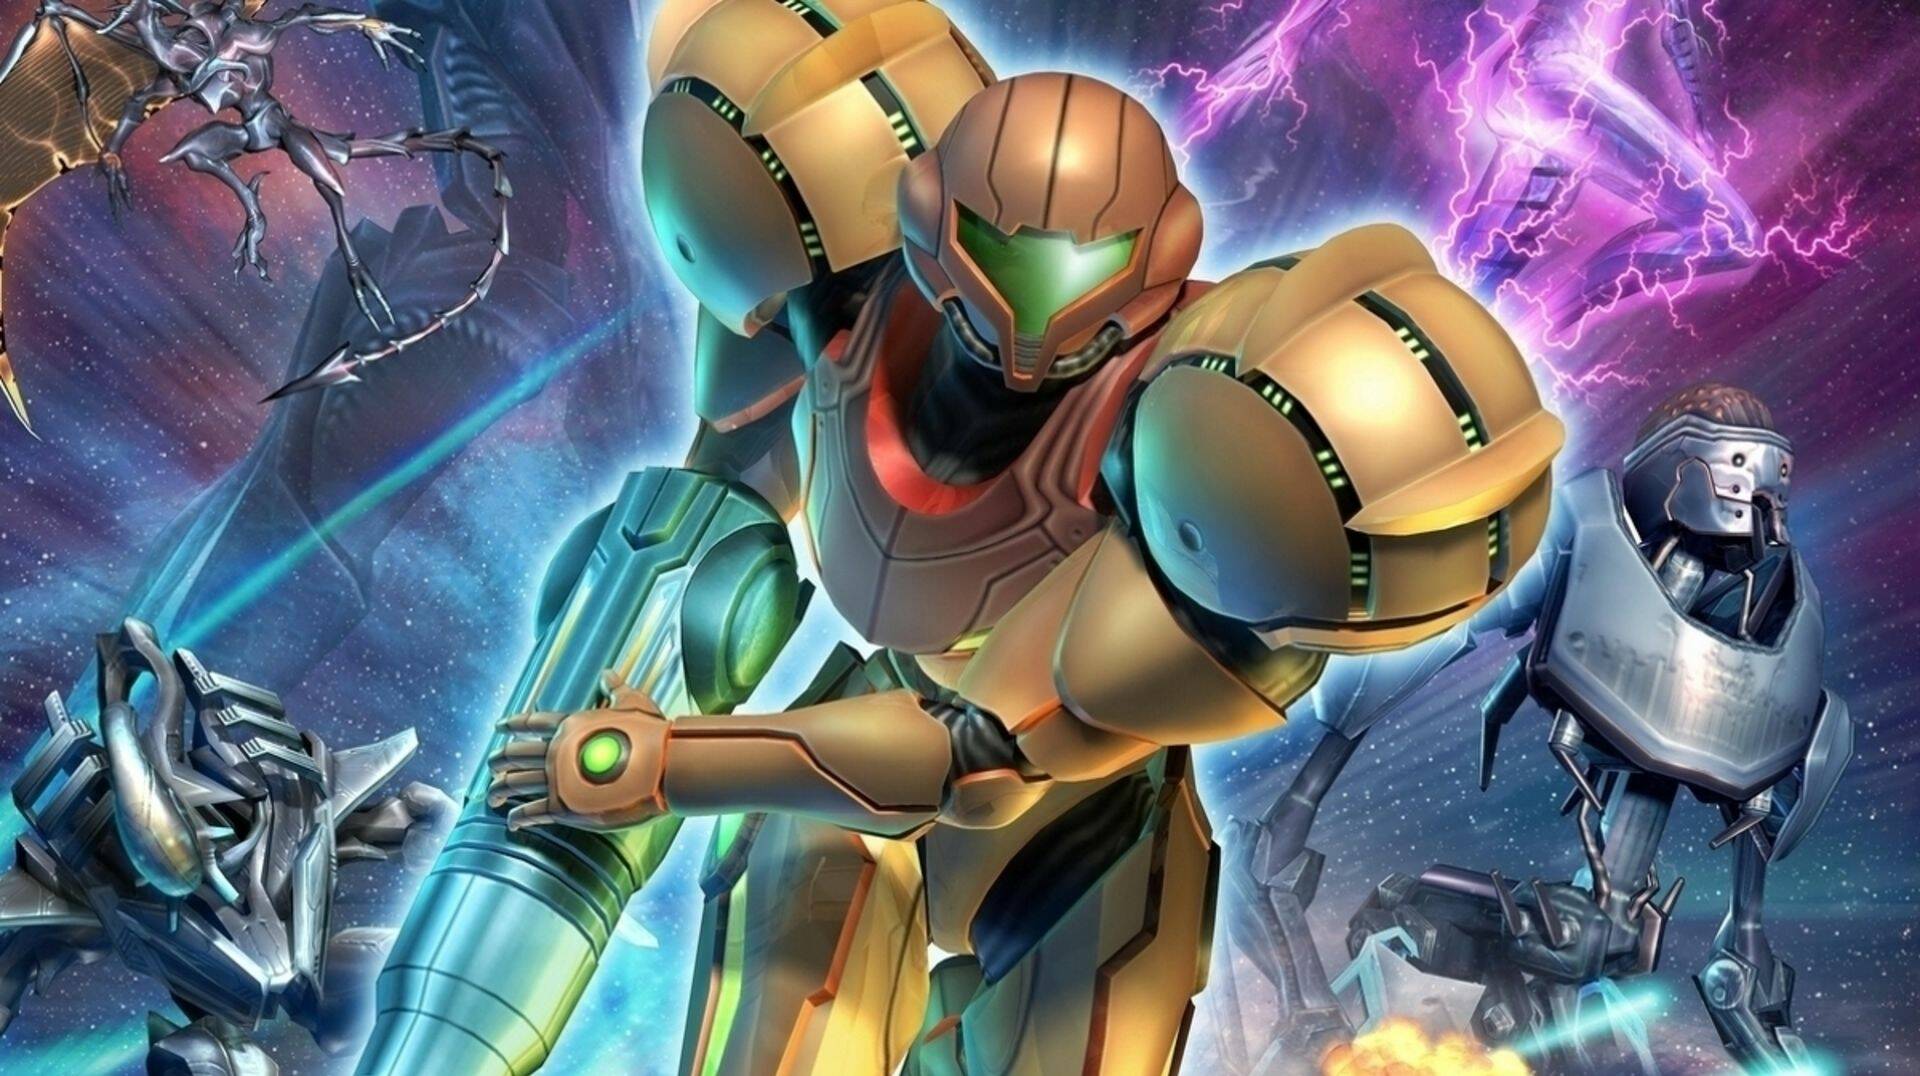 Metroid Prime 4 was reset exactly 3 years ago, where are we now?